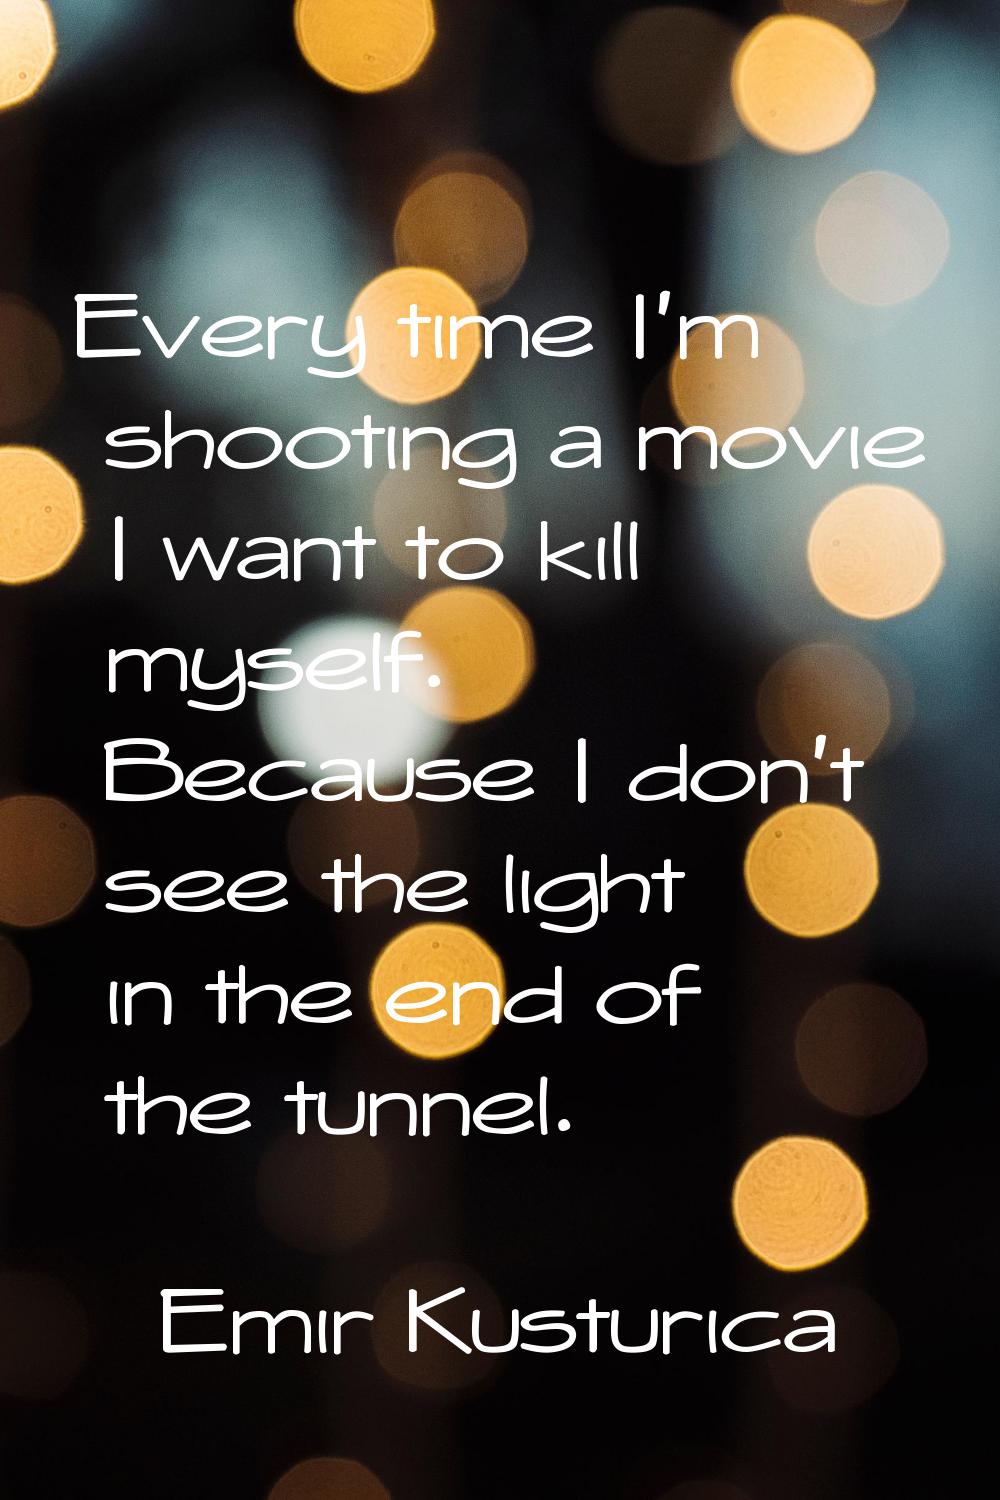 Every time I'm shooting a movie I want to kill myself. Because I don't see the light in the end of 